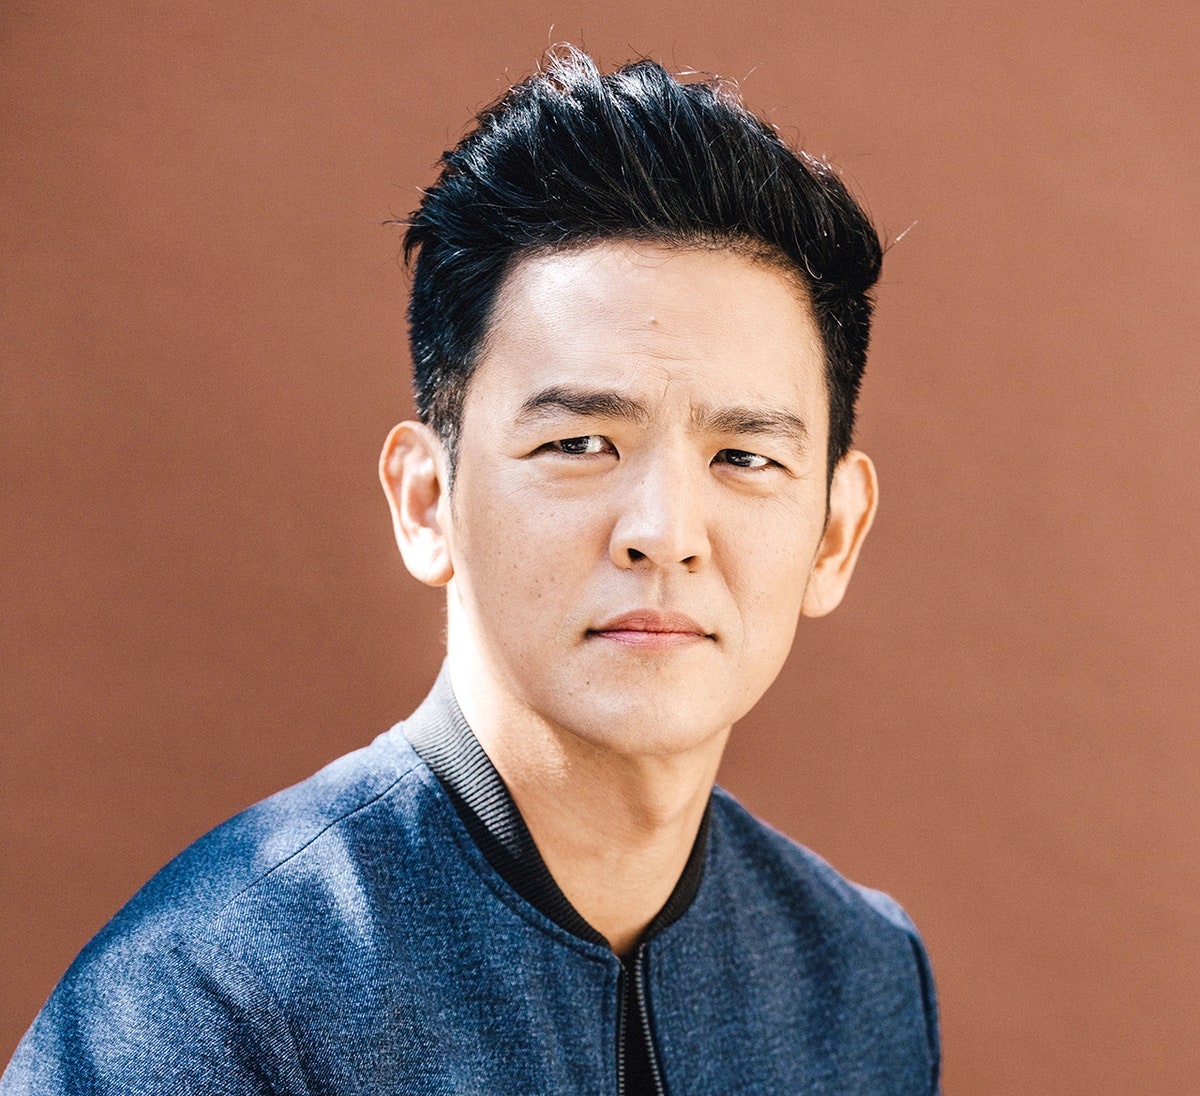 Let\s wish John Cho a happy 48th birthday!!

Which is your favorite performance from him? 